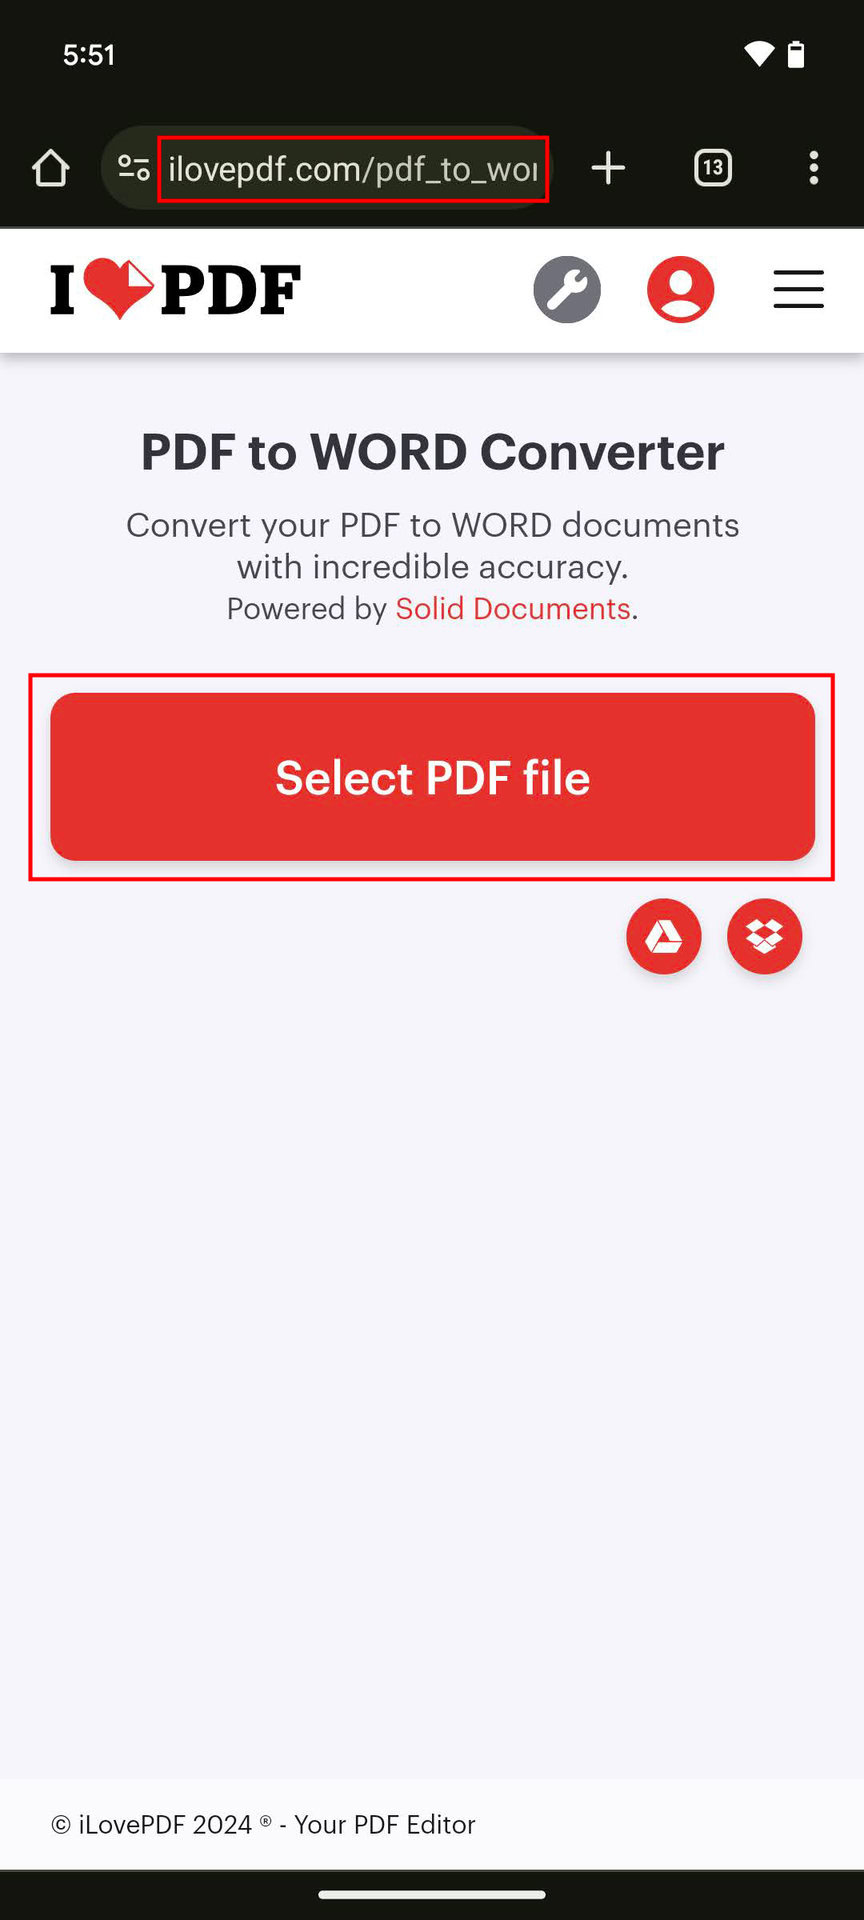 How to edit a PDF on Android without a paid Adobe subscription (1)